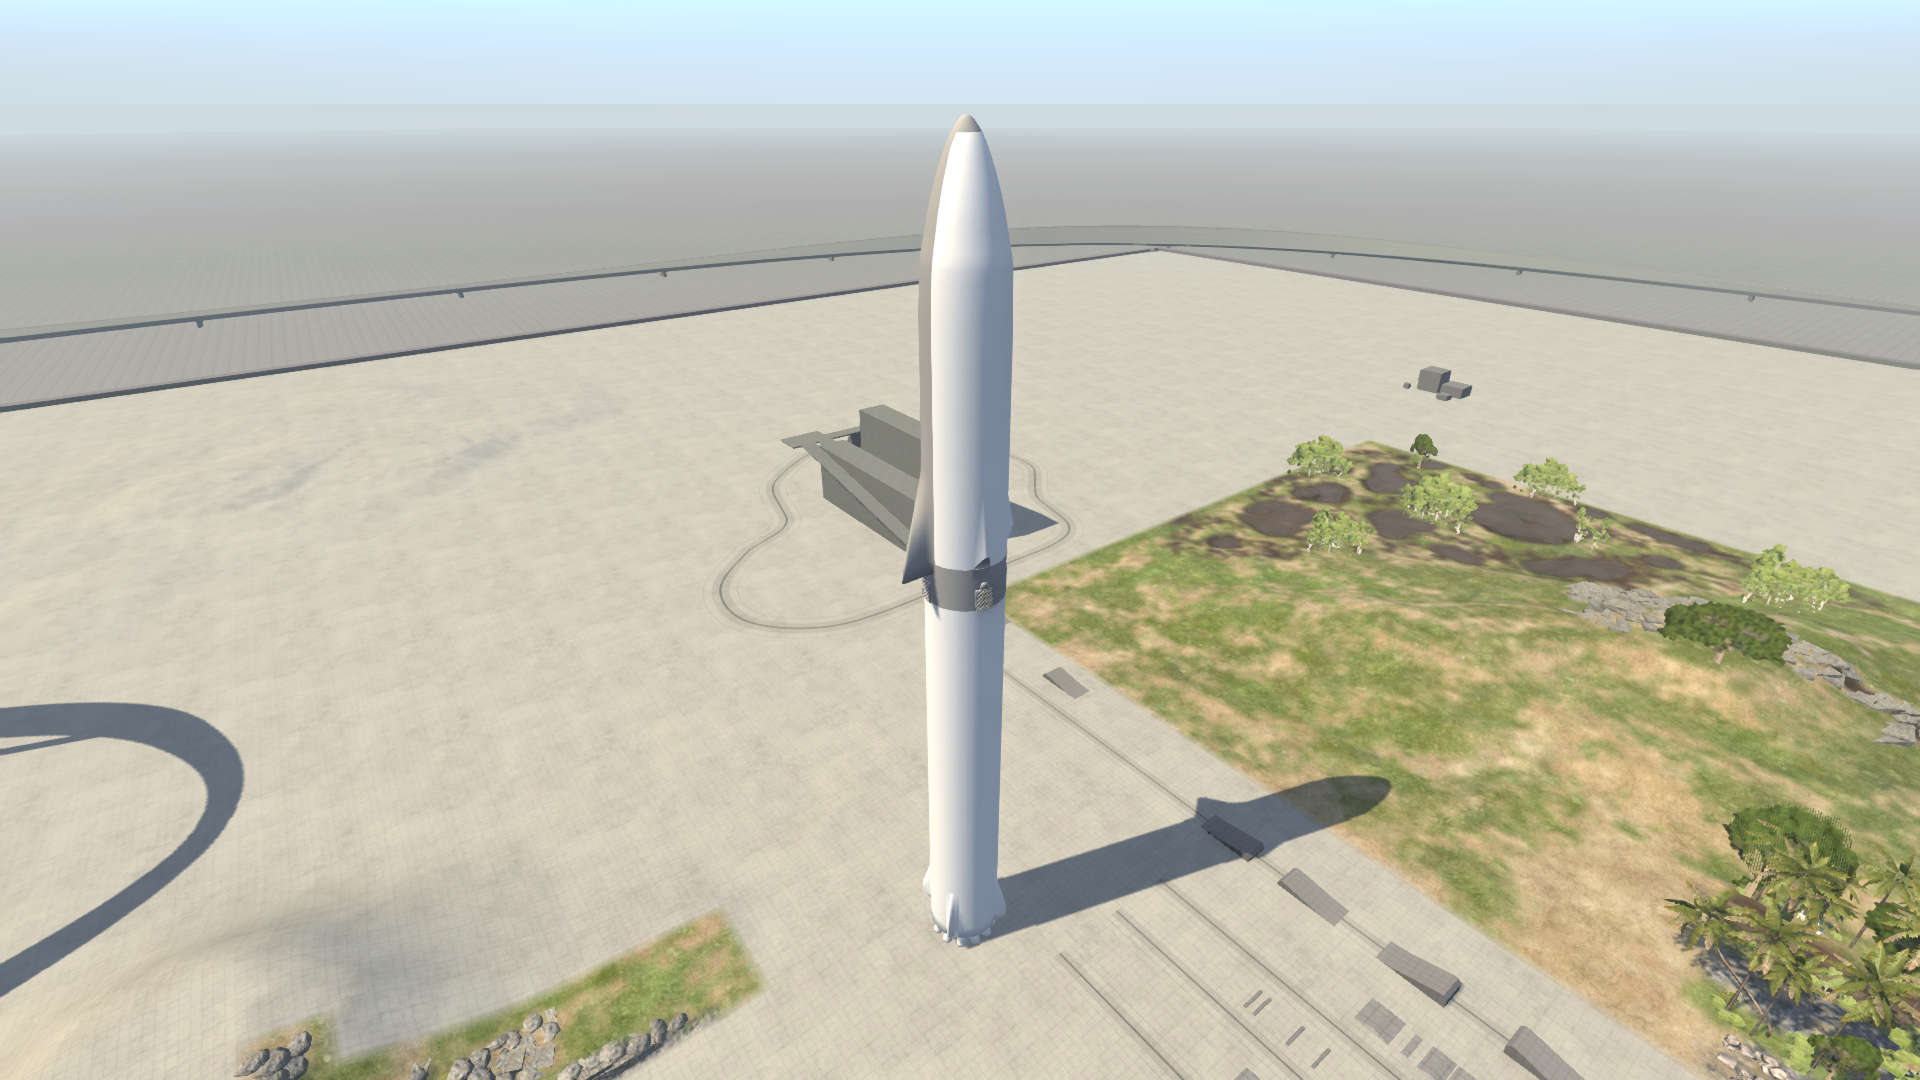 Cancelled Large Interplanetary Transport Big Falcon Rocket Images, Photos, Reviews